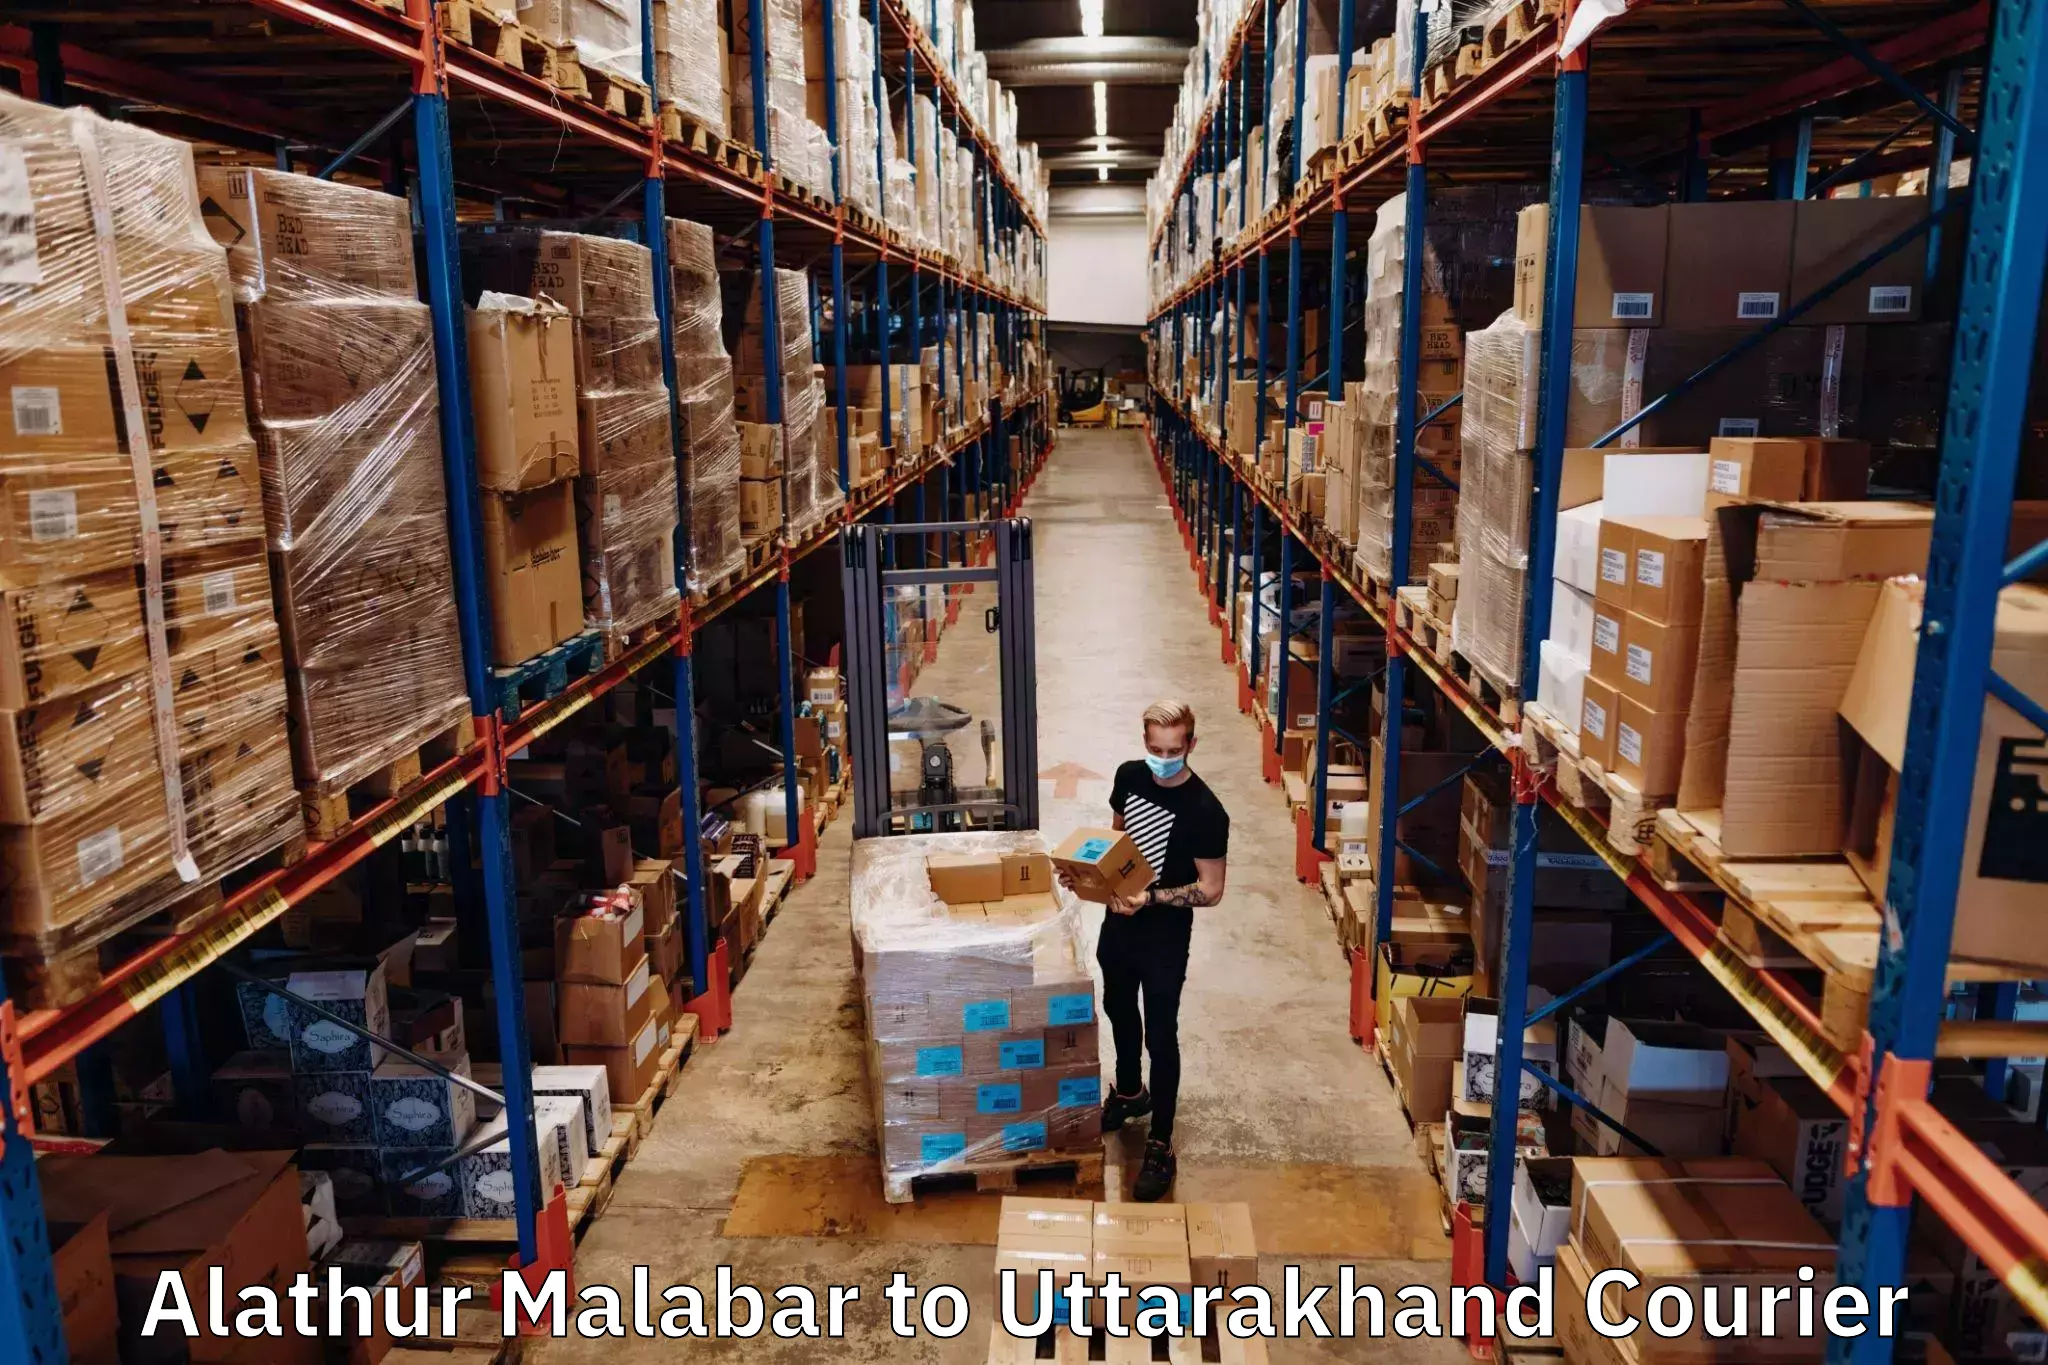 Multi-national courier services Alathur Malabar to Bageshwar